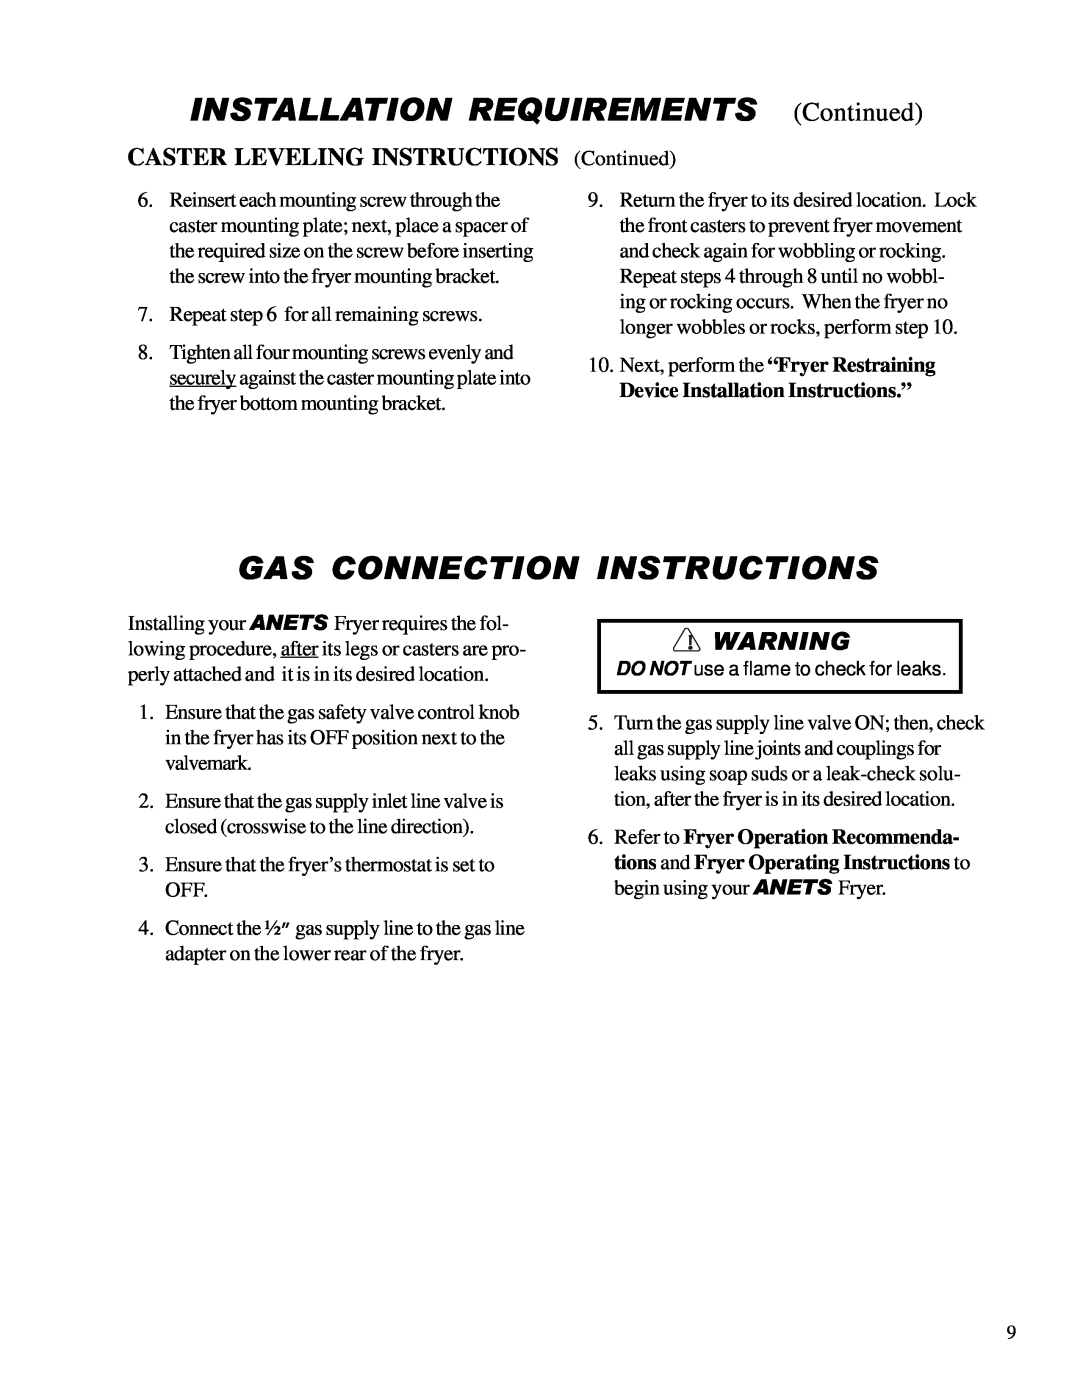 Anetsberger Brothers 14VFS Gas Connection Instructions, Caster Leveling Instructions, Device Installation Instructions.” 